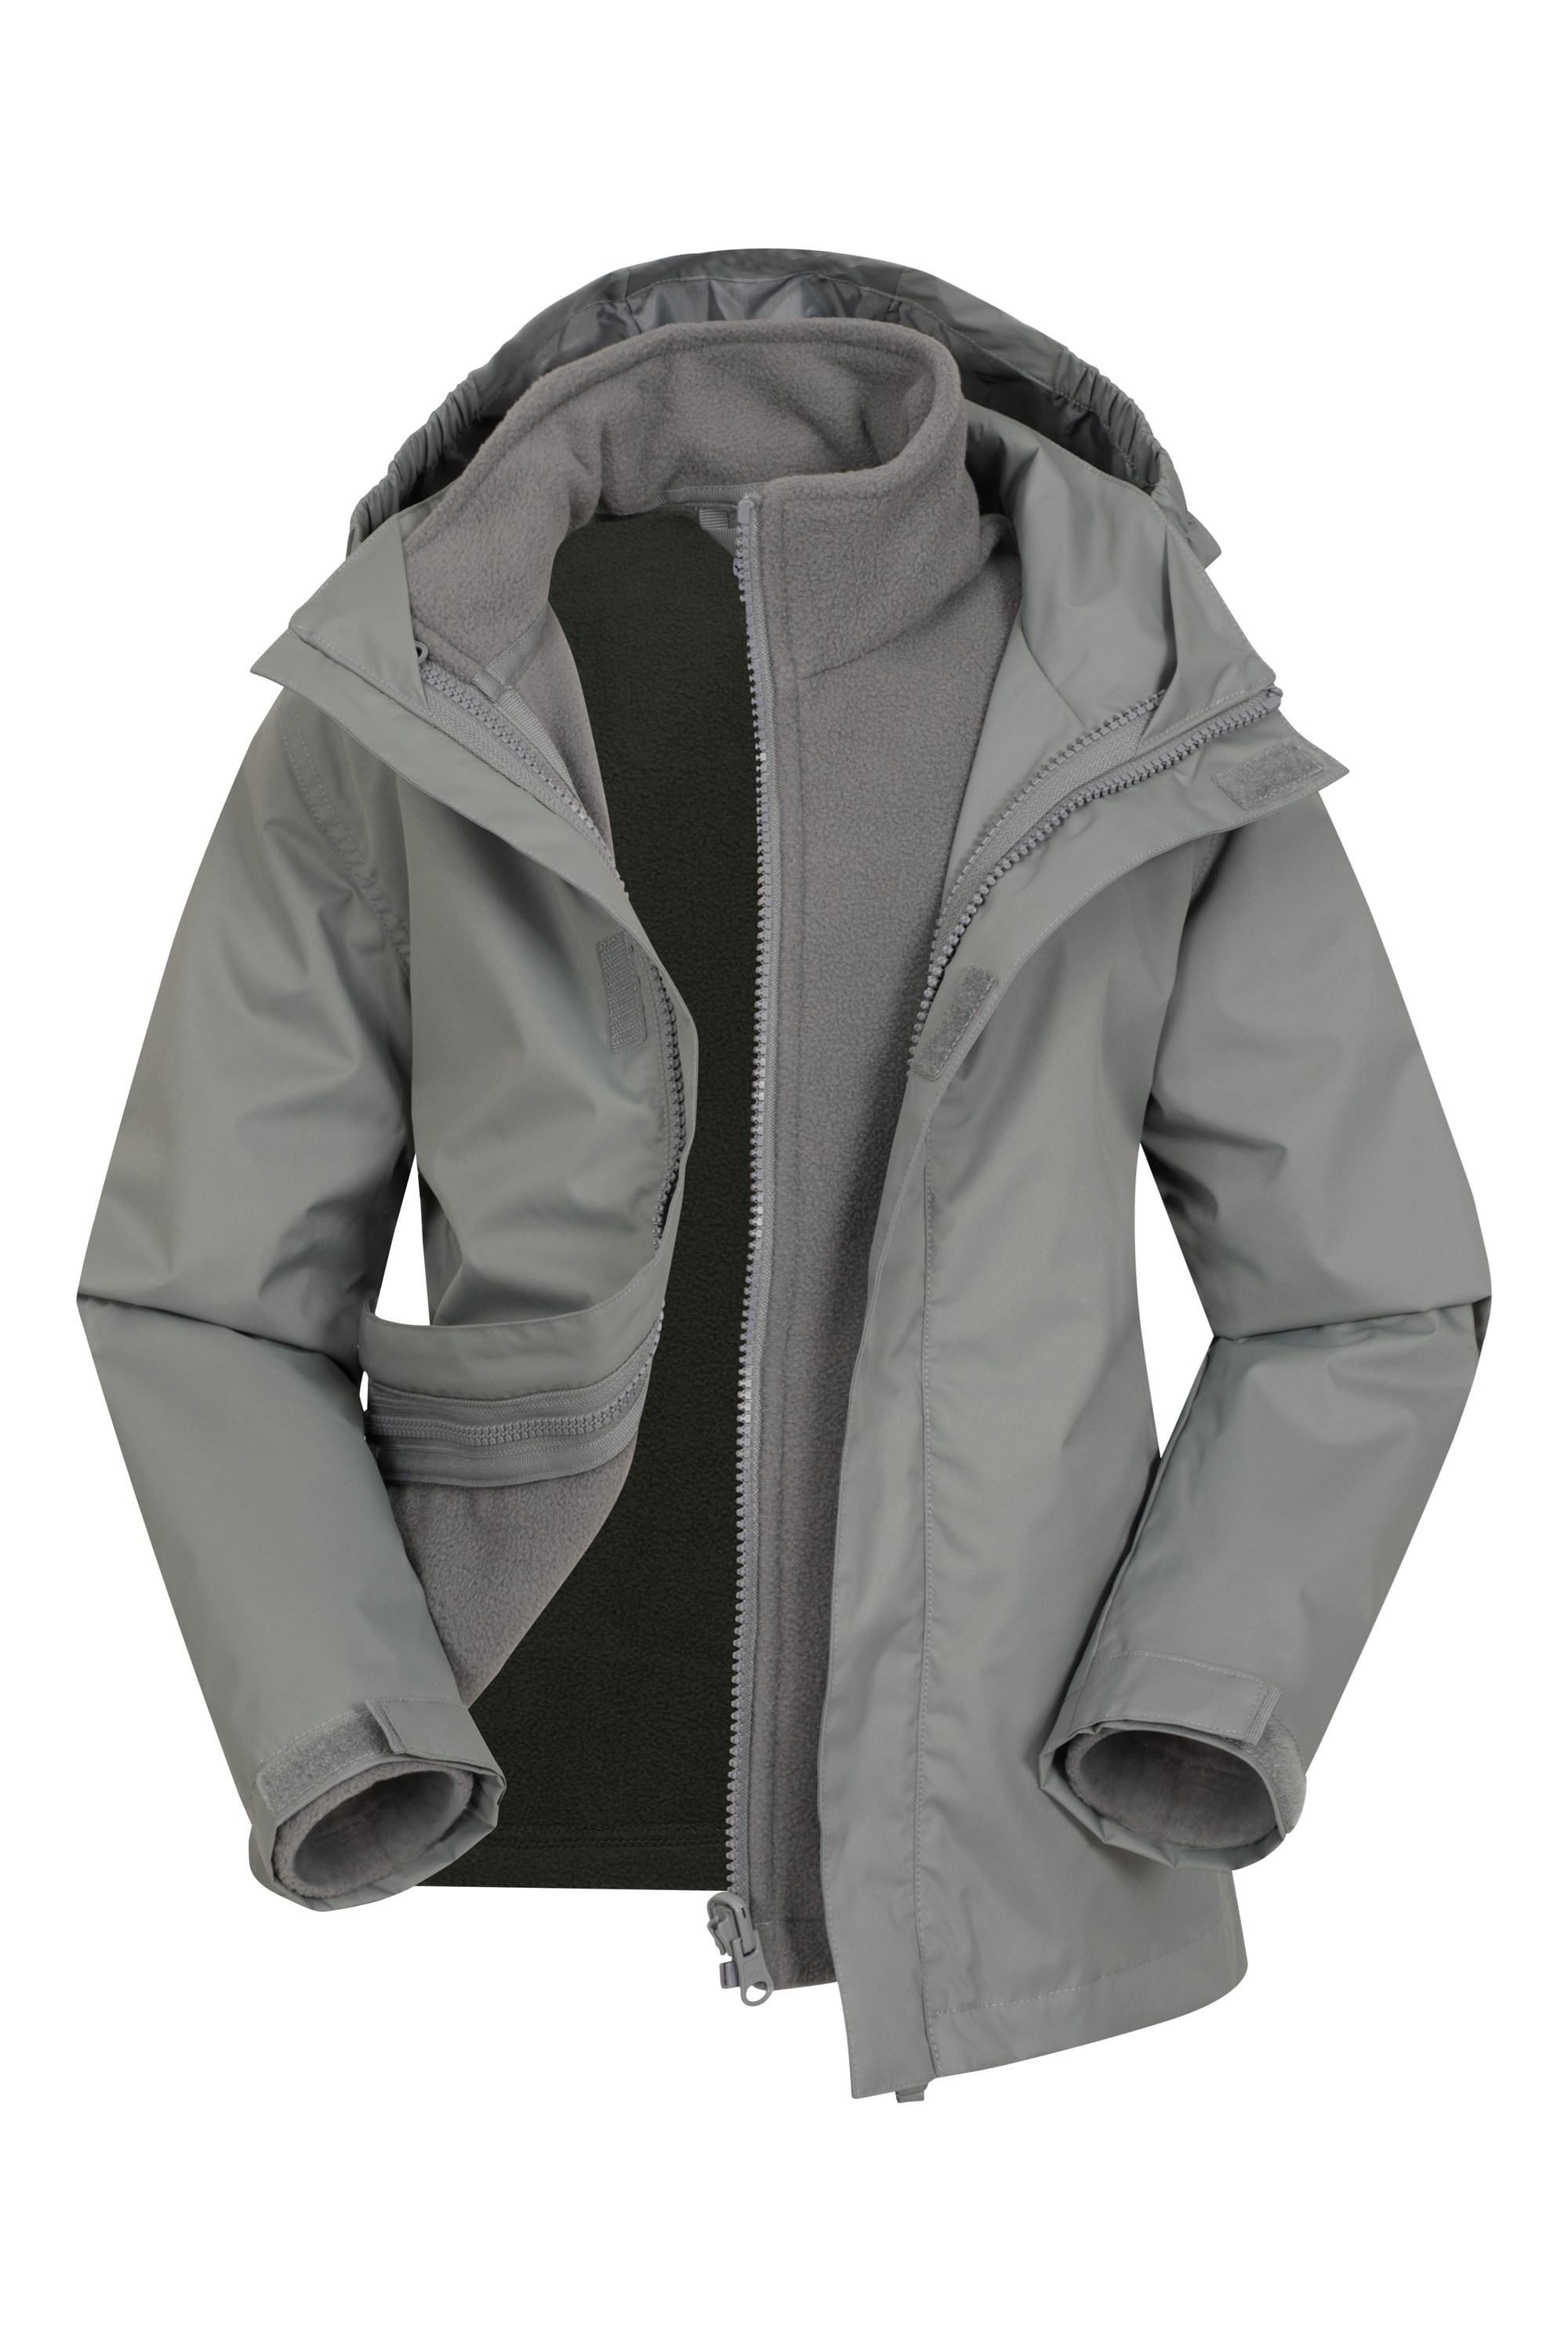 Mountain Warehouse New mountain warehouse 3 in 1 black jacket with hood boys 11-12 years 